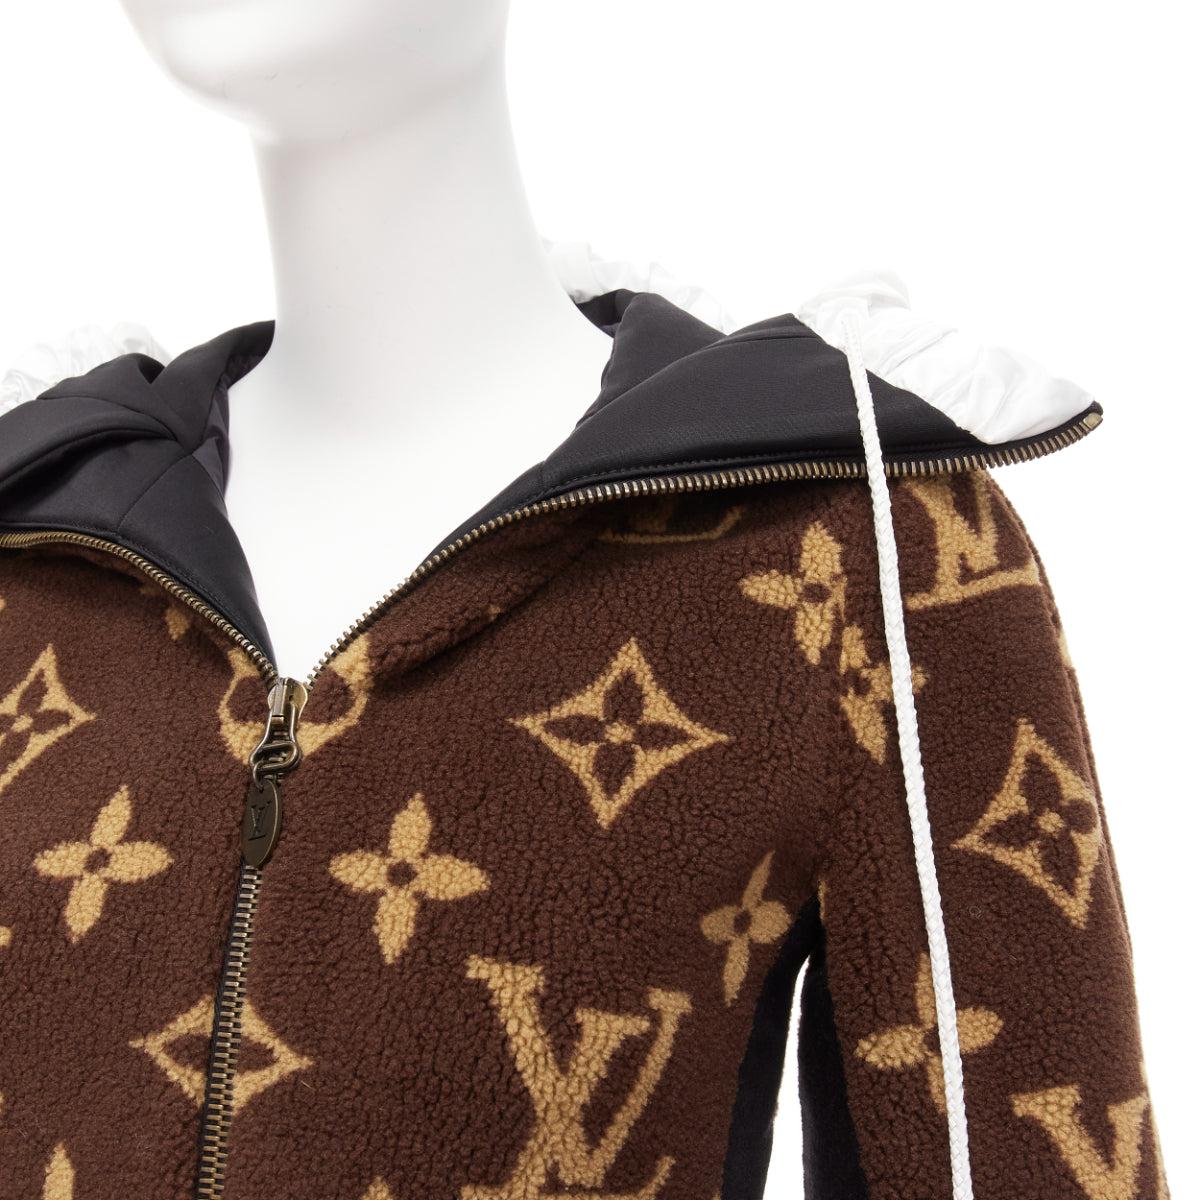 rare LOUIS VUITTON 2021 Giant XL monogram brown fleece hooded jacket FR34 XS
Reference: AAWC/A00613
Brand: Louis Vuitton
Designer: Nicolas Ghesquiere
Material: Polyester, Blend
Color: Brown, Black
Pattern: Monogram
Closure: Zip
Extra Details: A